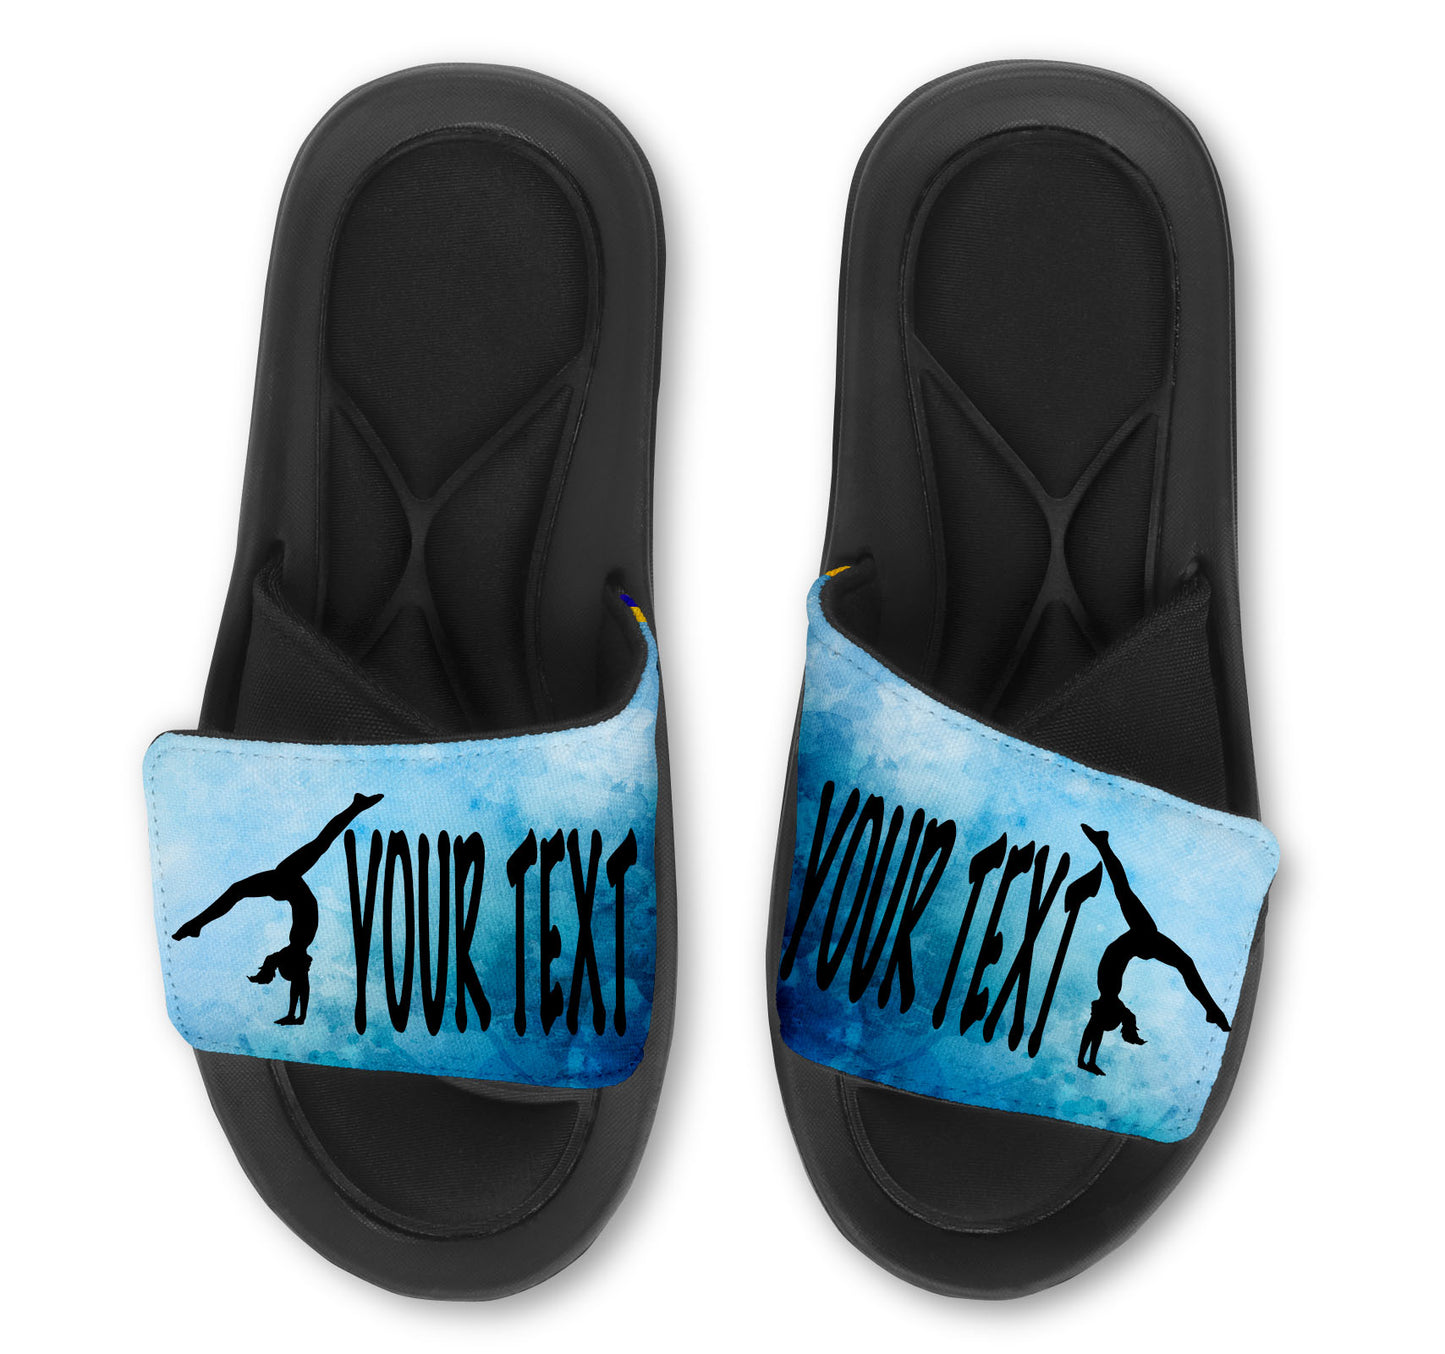 Gymnastics Custom Slides Sandals with Watercolor Background